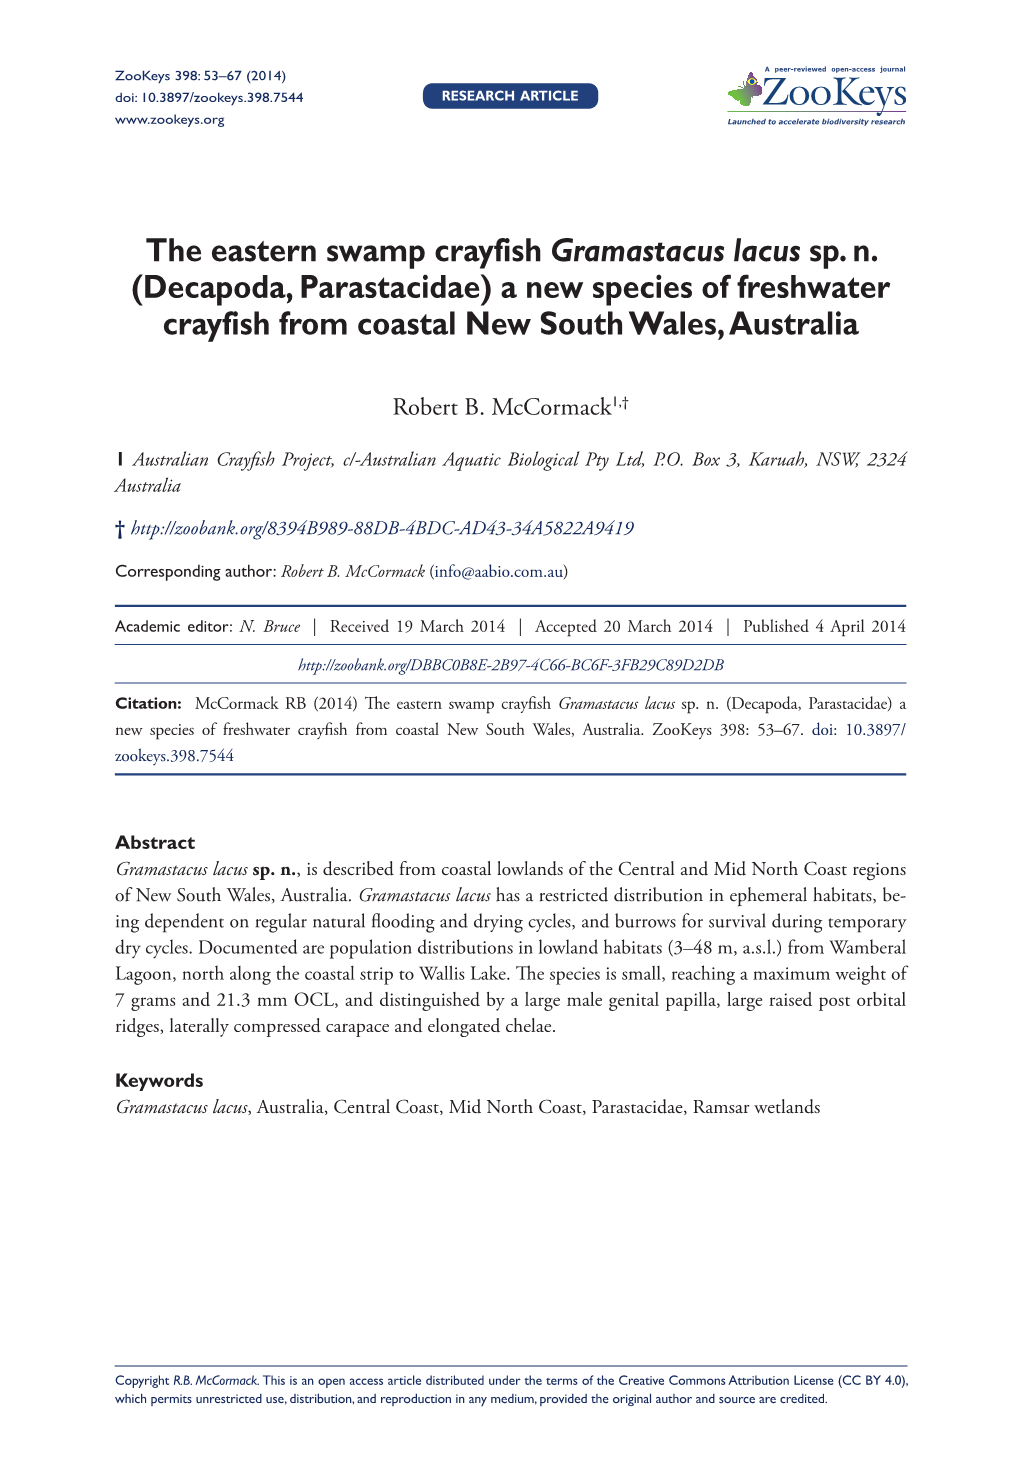 The Eastern Swamp Crayfish Gramastacus Lacus Sp. N. (Decapoda, Parastacidae) a New Species of Freshwater Crayfish from Coastal New South Wales, Australia